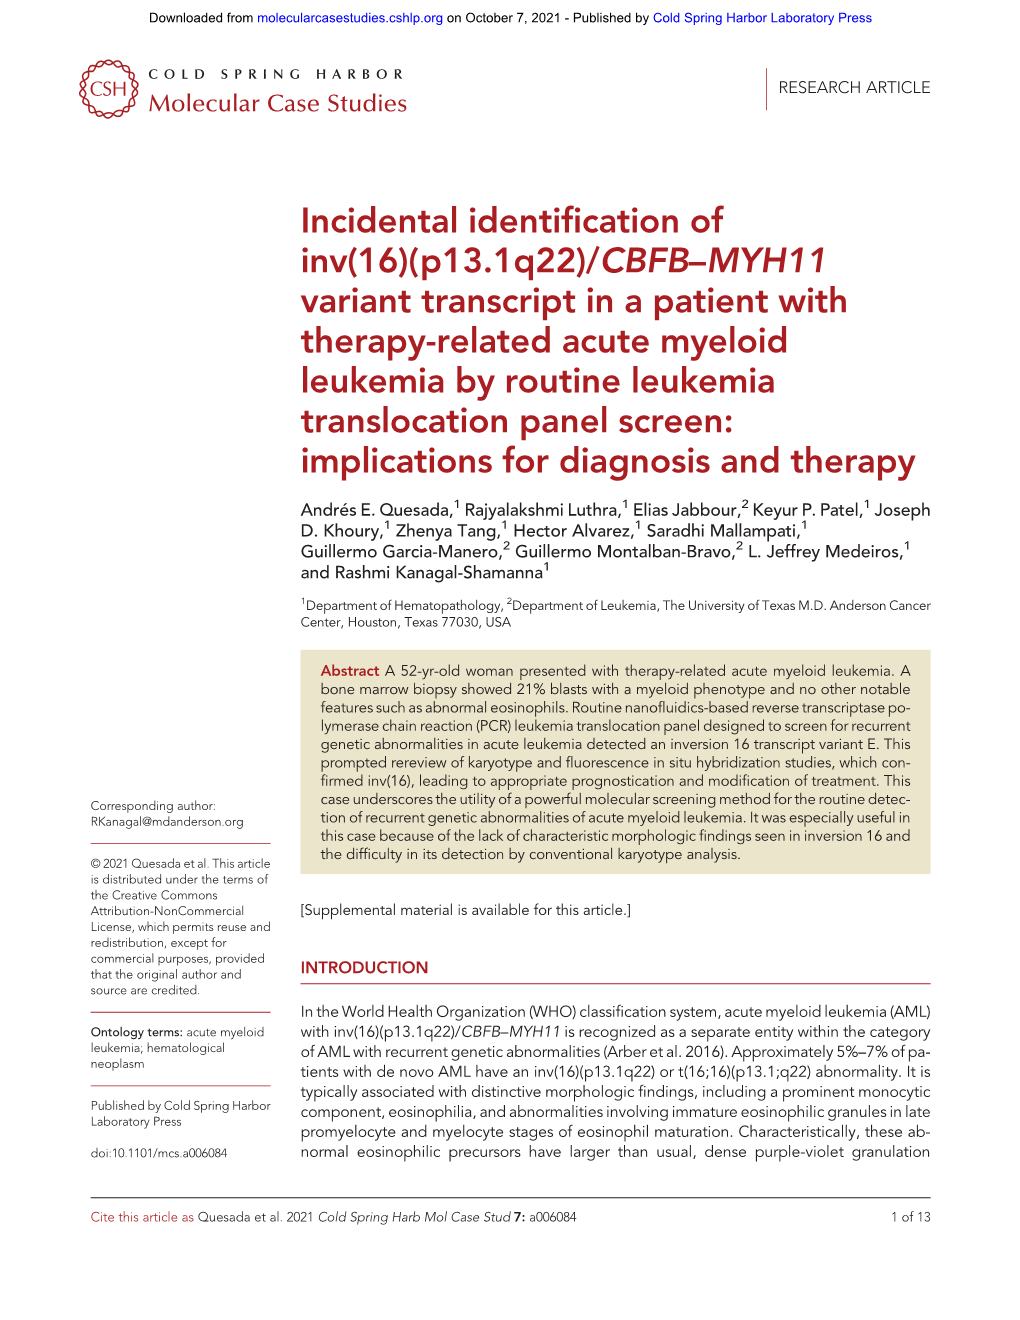 Variant Transcript in a Patient with Therapy-Related Acute Myeloid Leukemia by Routine Leukemia Translocation Panel Screen: Implications for Diagnosis and Therapy